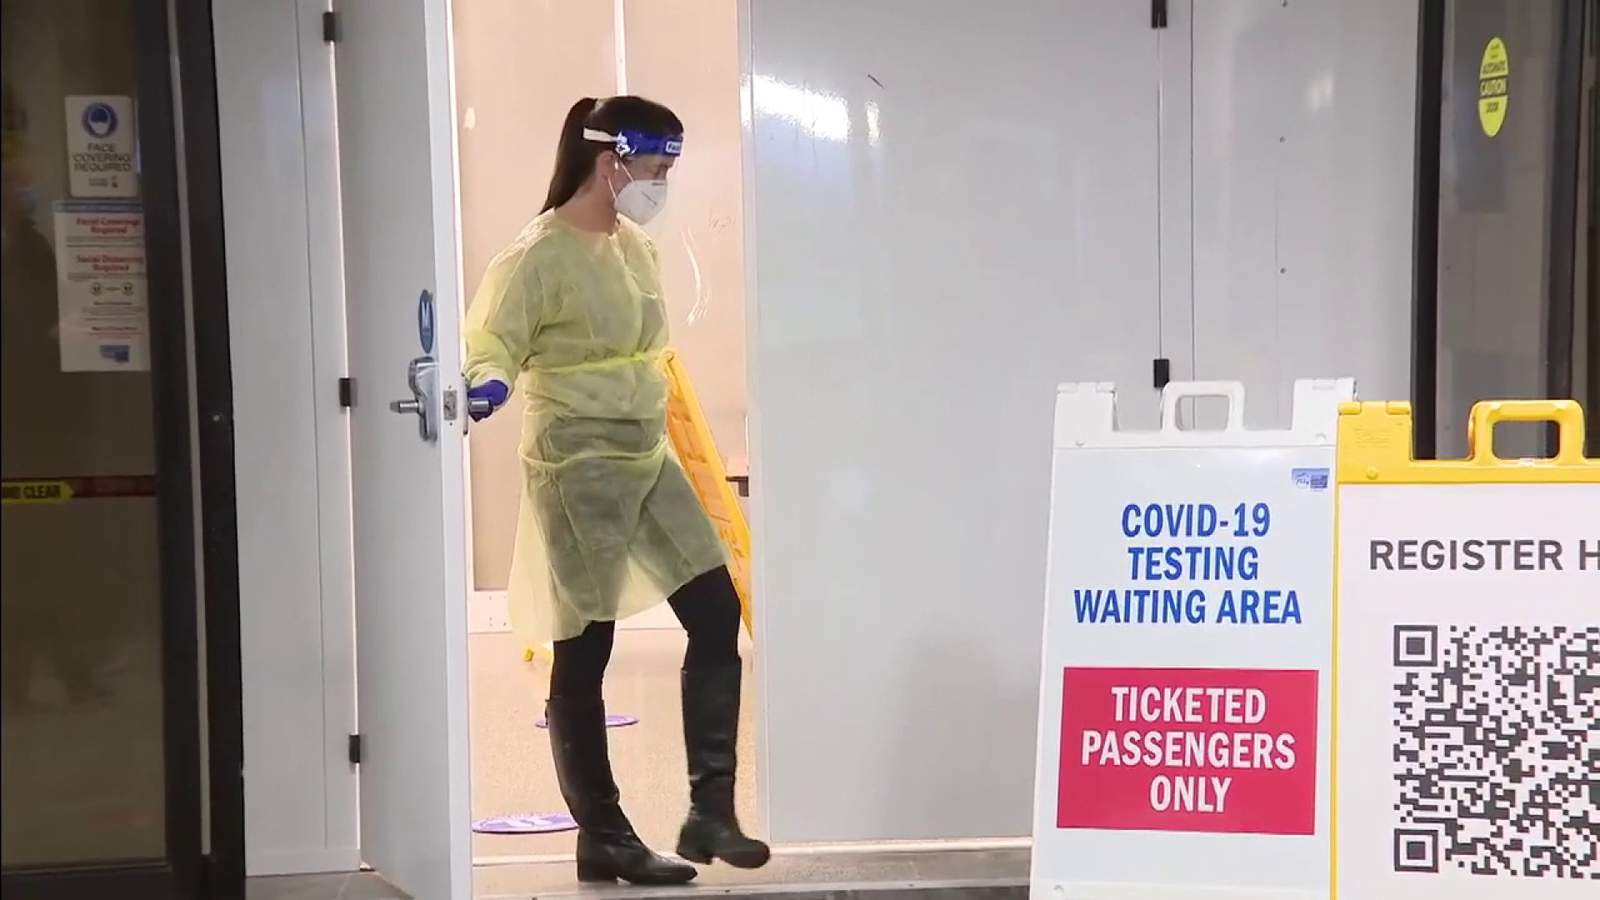 Air travelers pay for convenience at FLL’s new coronavirus testing area